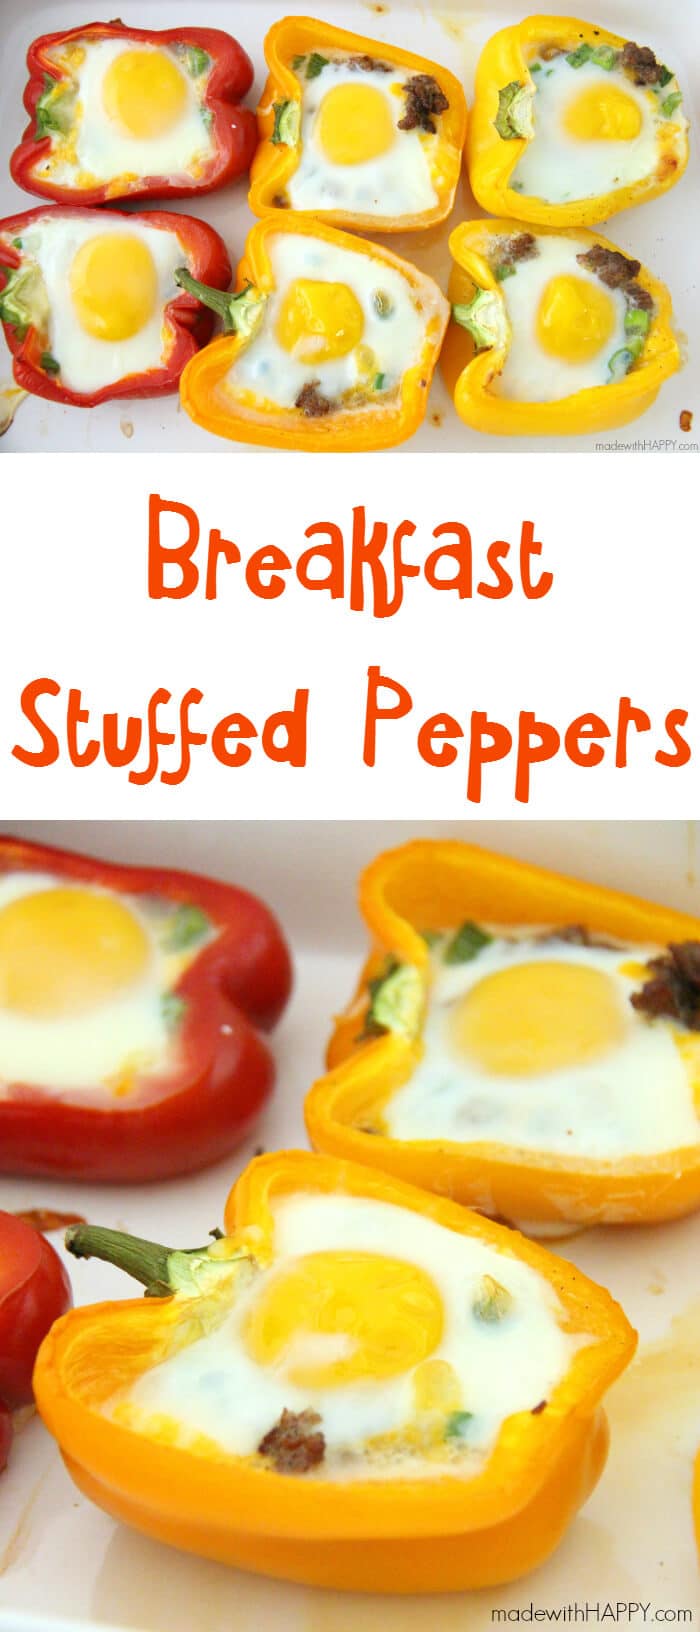 Breakfast Stuffed Peppers | Sausage Stuffed Pepper | Brunch Ideas | Sausage, Egg and Cheese in a Bellpepper | www.madewithhappy.com